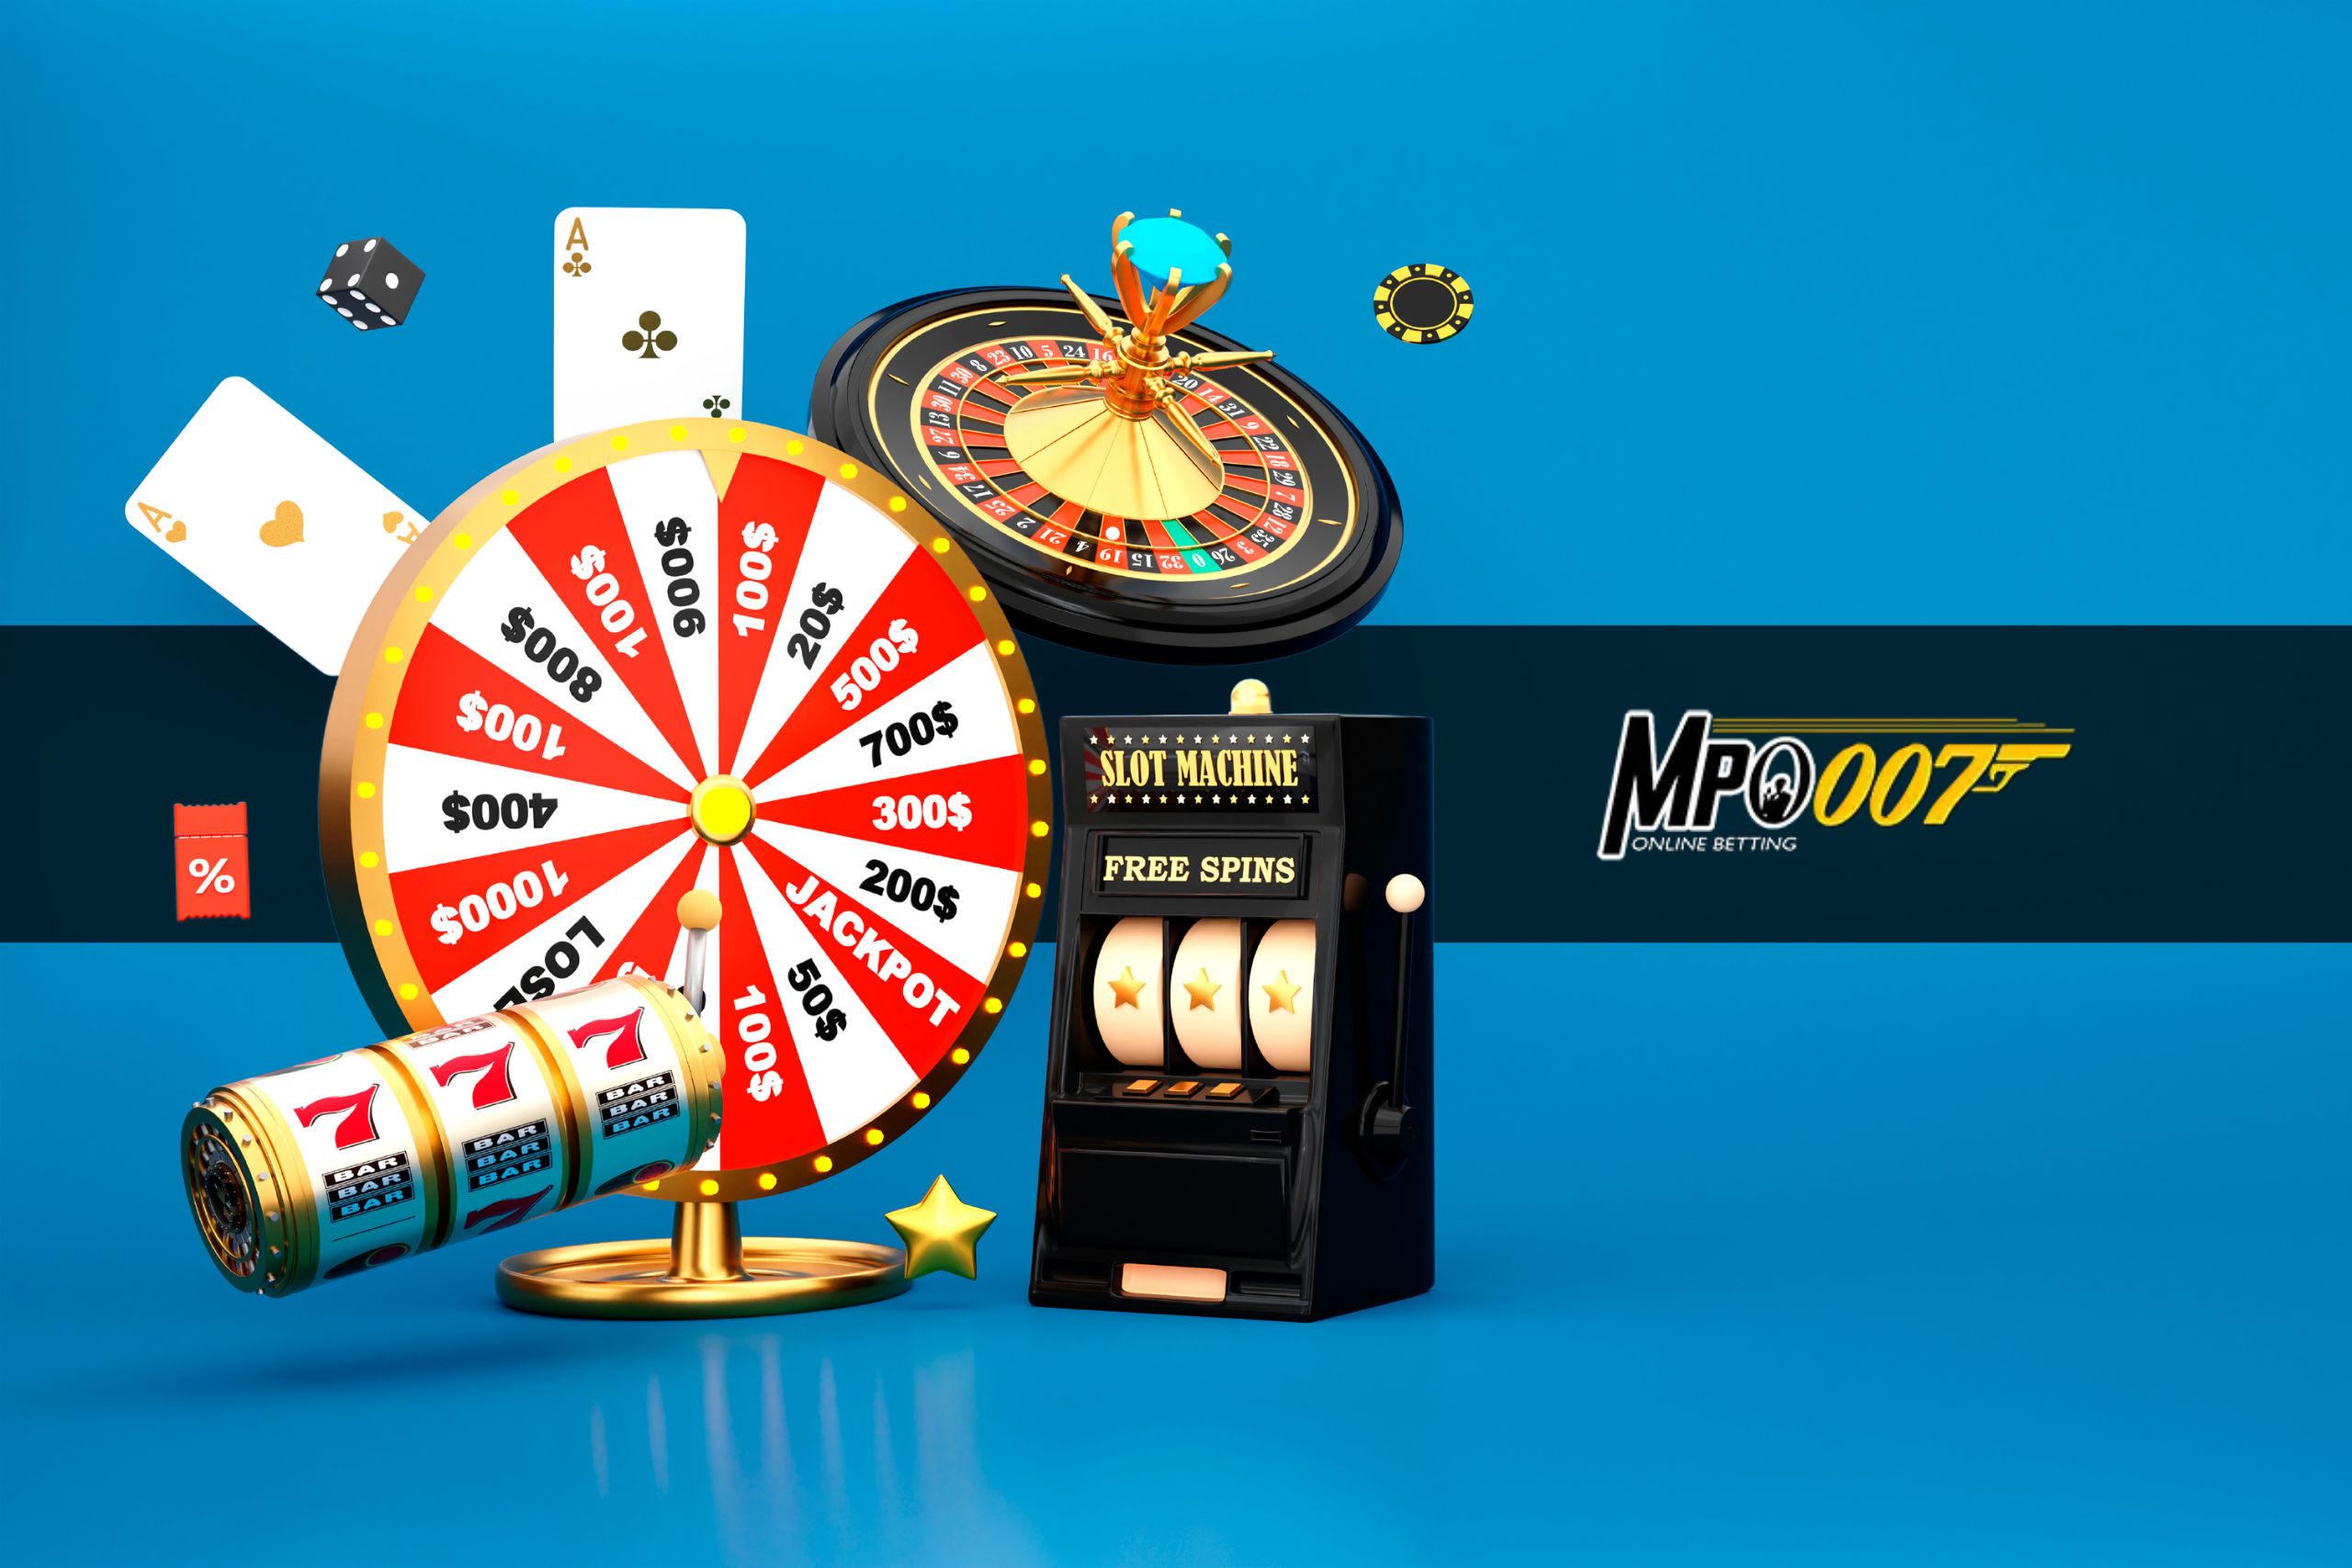 MPO007 Slots: The Perfect Online Casino Experience